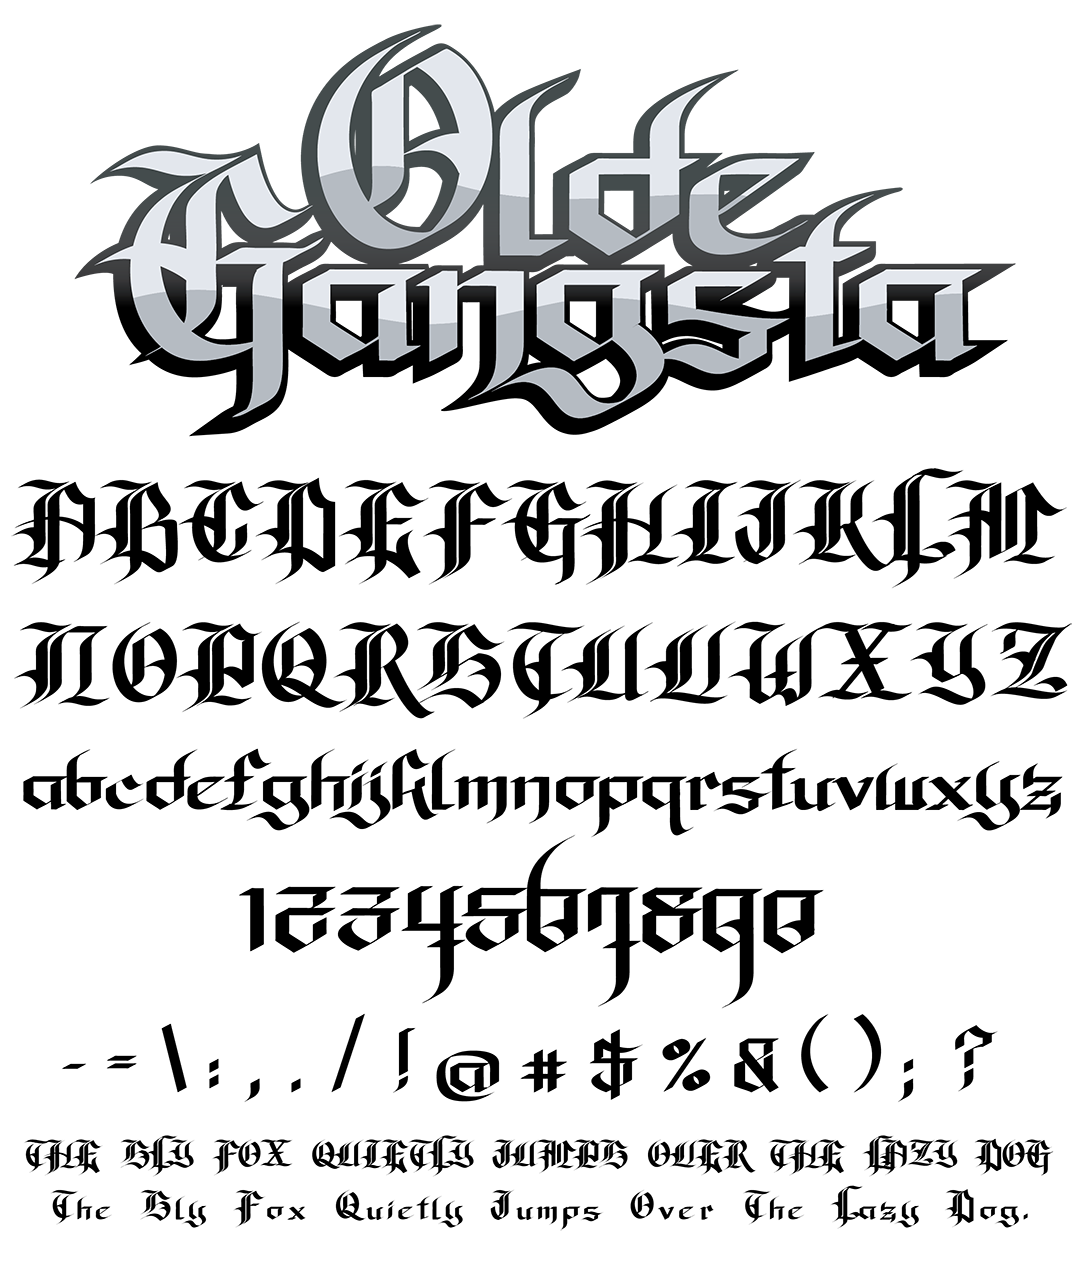 old english calligraphy gang font letters